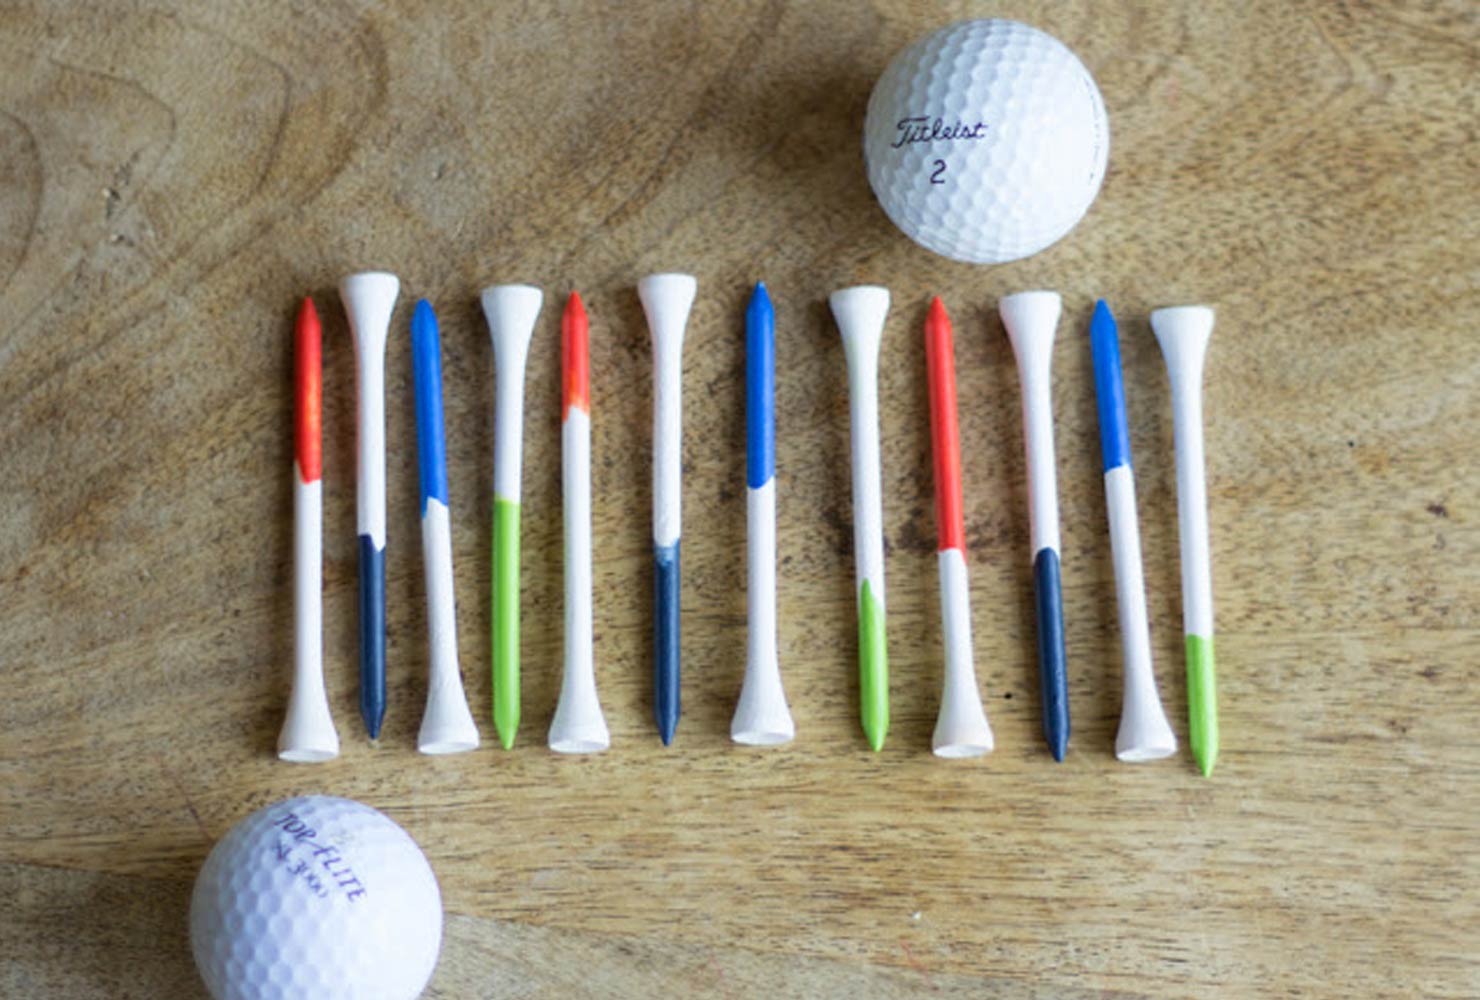 Paint dipped golf tees and golf balls.